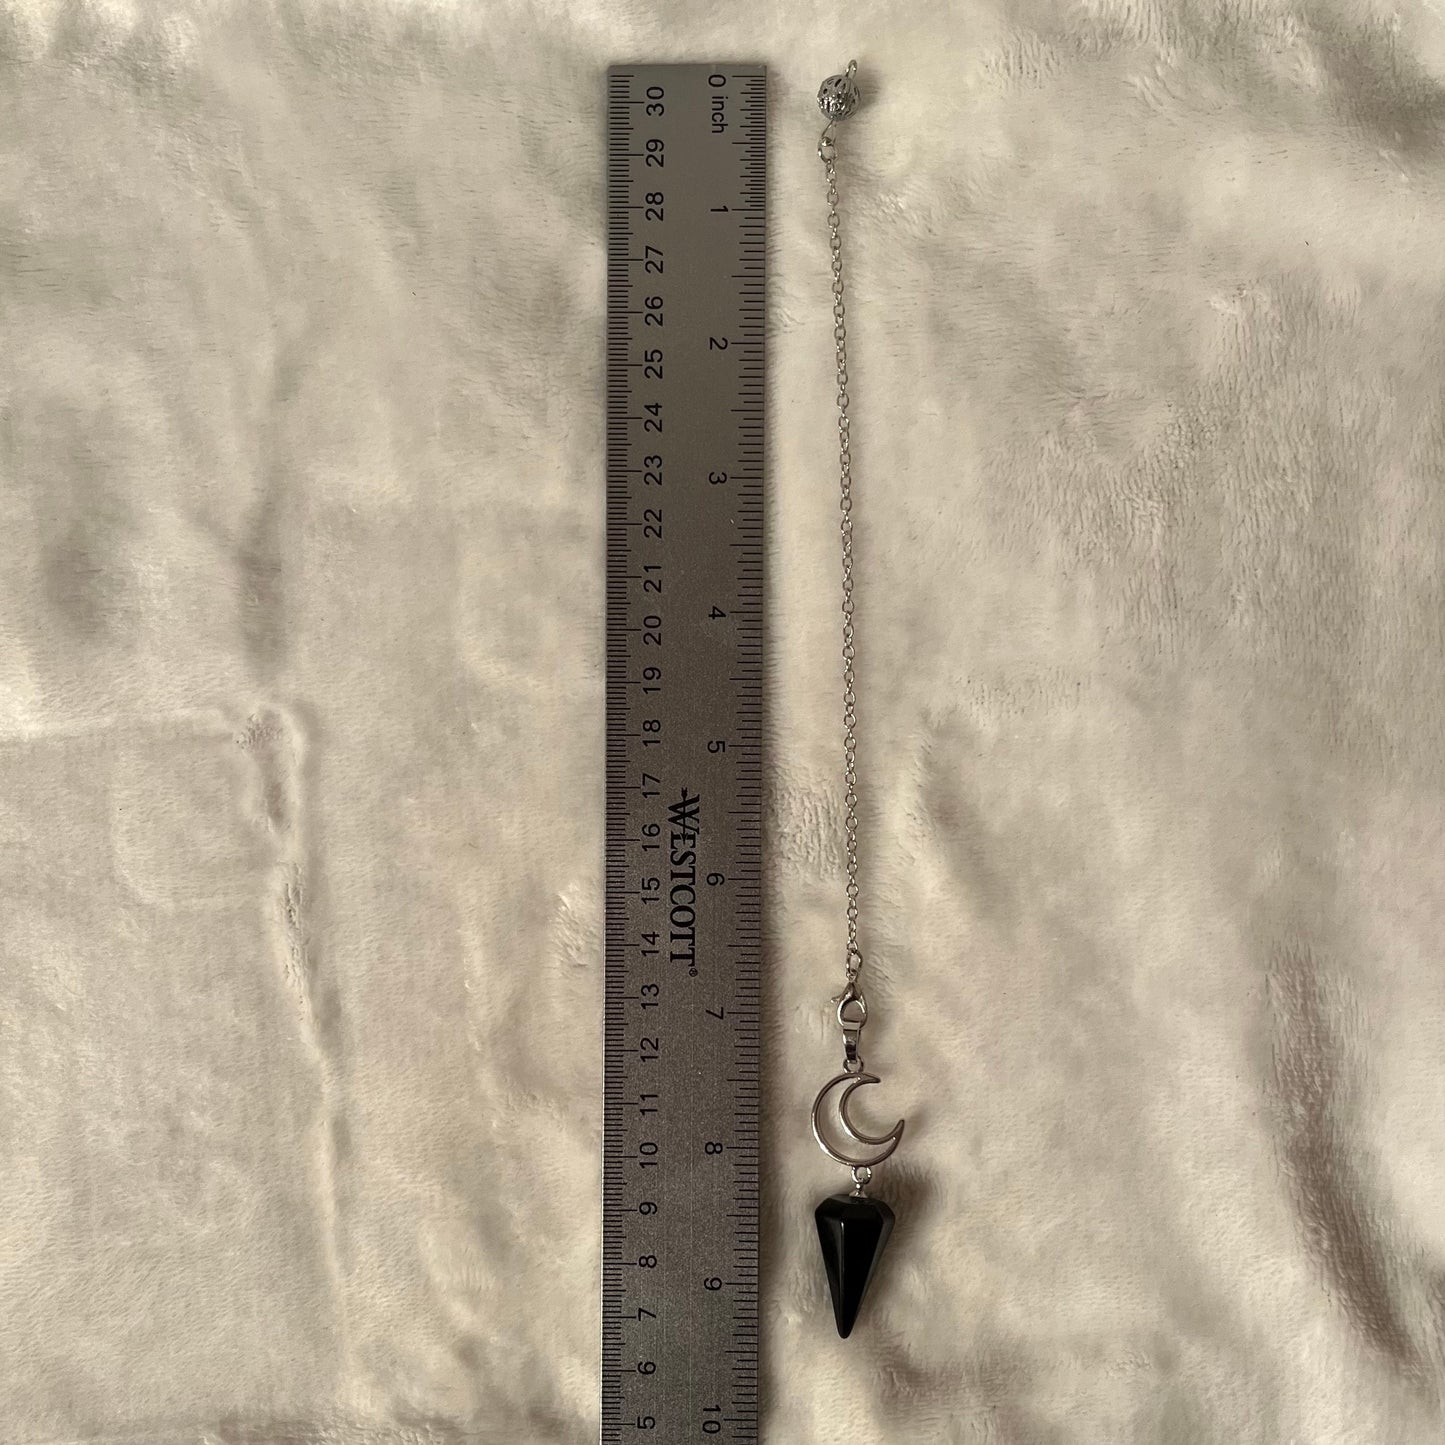 1 inch black obsidian pendulum attarched to a silver crescent moon, both connected to an 8 inch silver chain, next to a silver ruler against a white backround